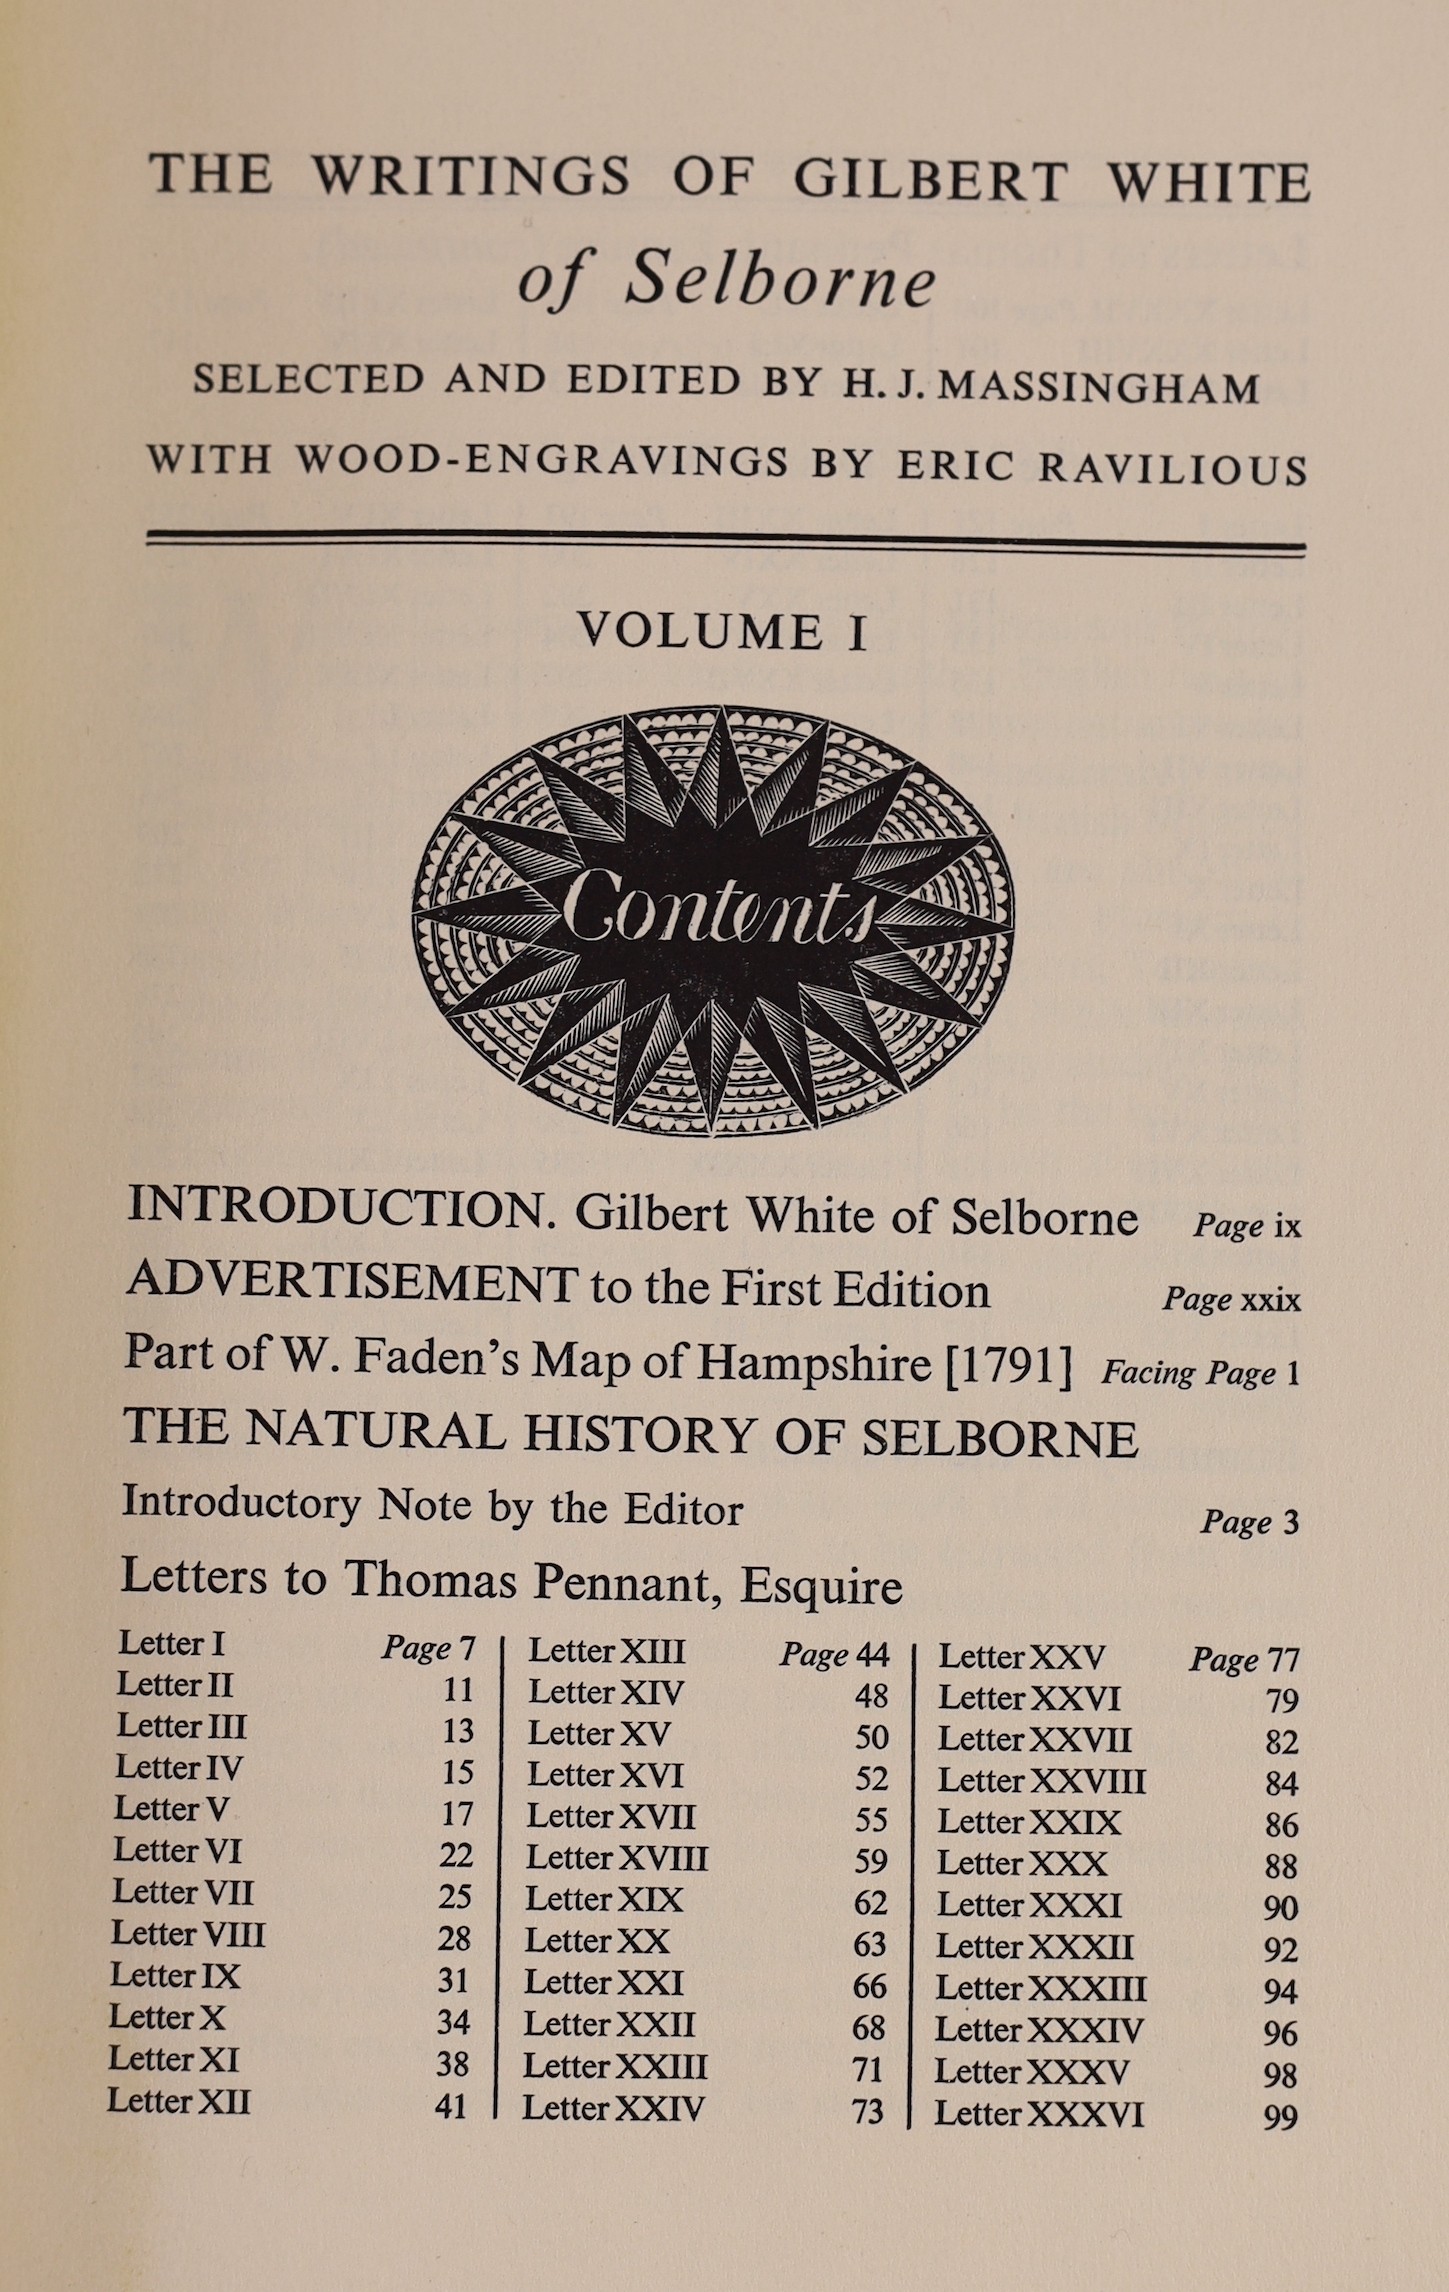 White, Gilbert - The Writings of Gilbert White of Selborne Selected and edited by H.J Massingham, 2 vols, on of 850, 8vo, buckram, with wood-engravings by Eric Ravilious, The Nonesuch Press, London, 1938, together with 2